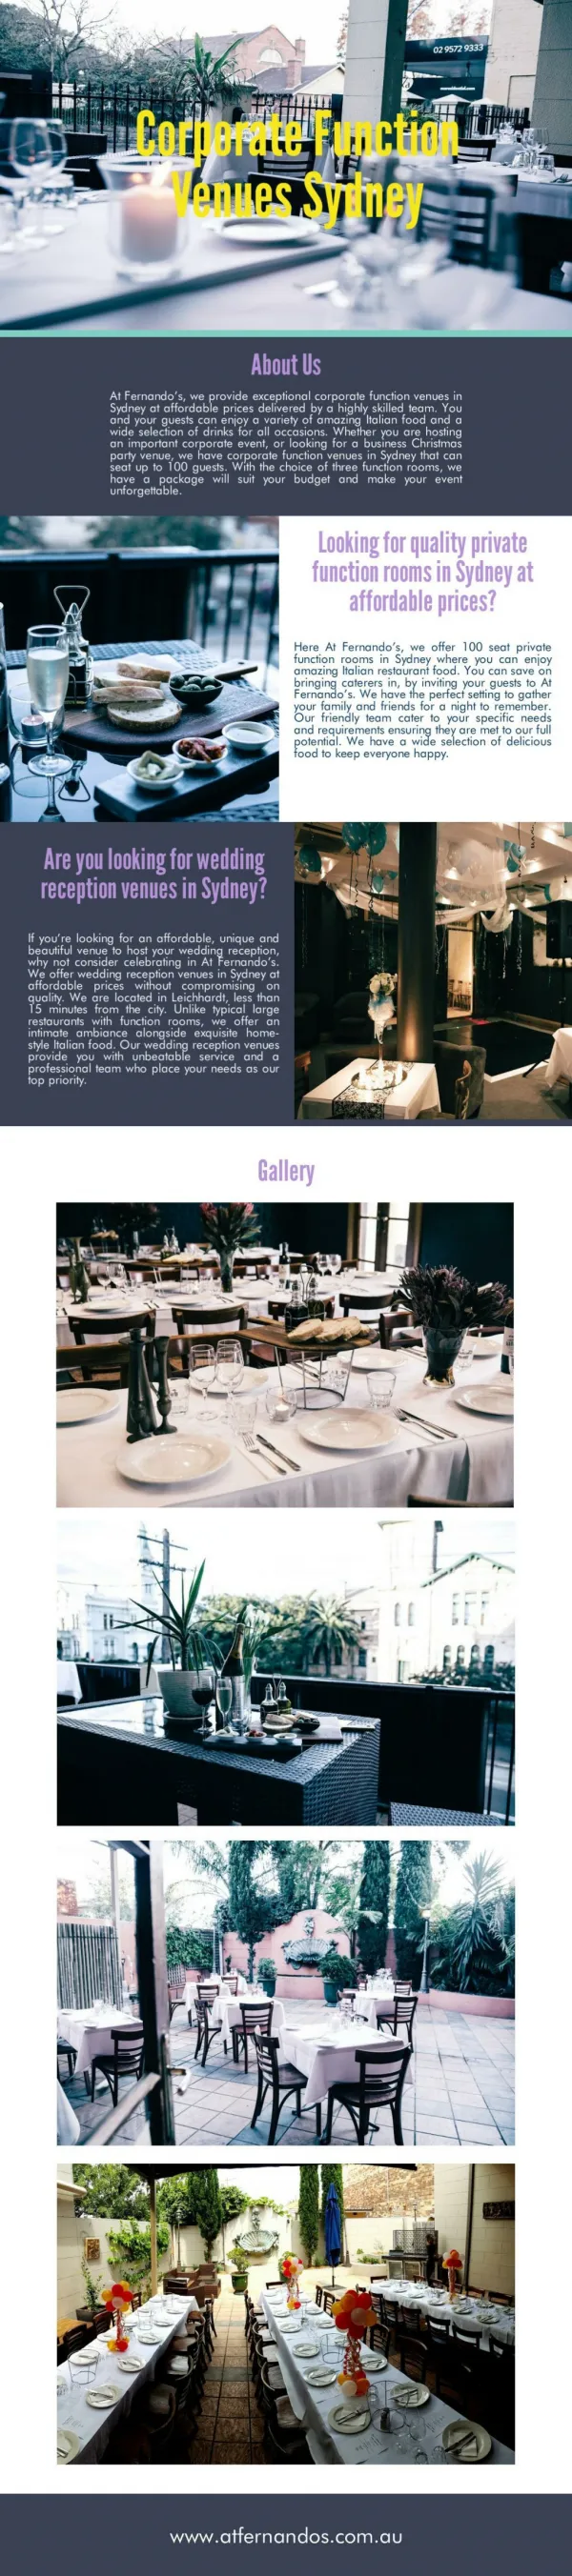 Looking For Corporate Function Venues Sydney, At Affordable Prices?